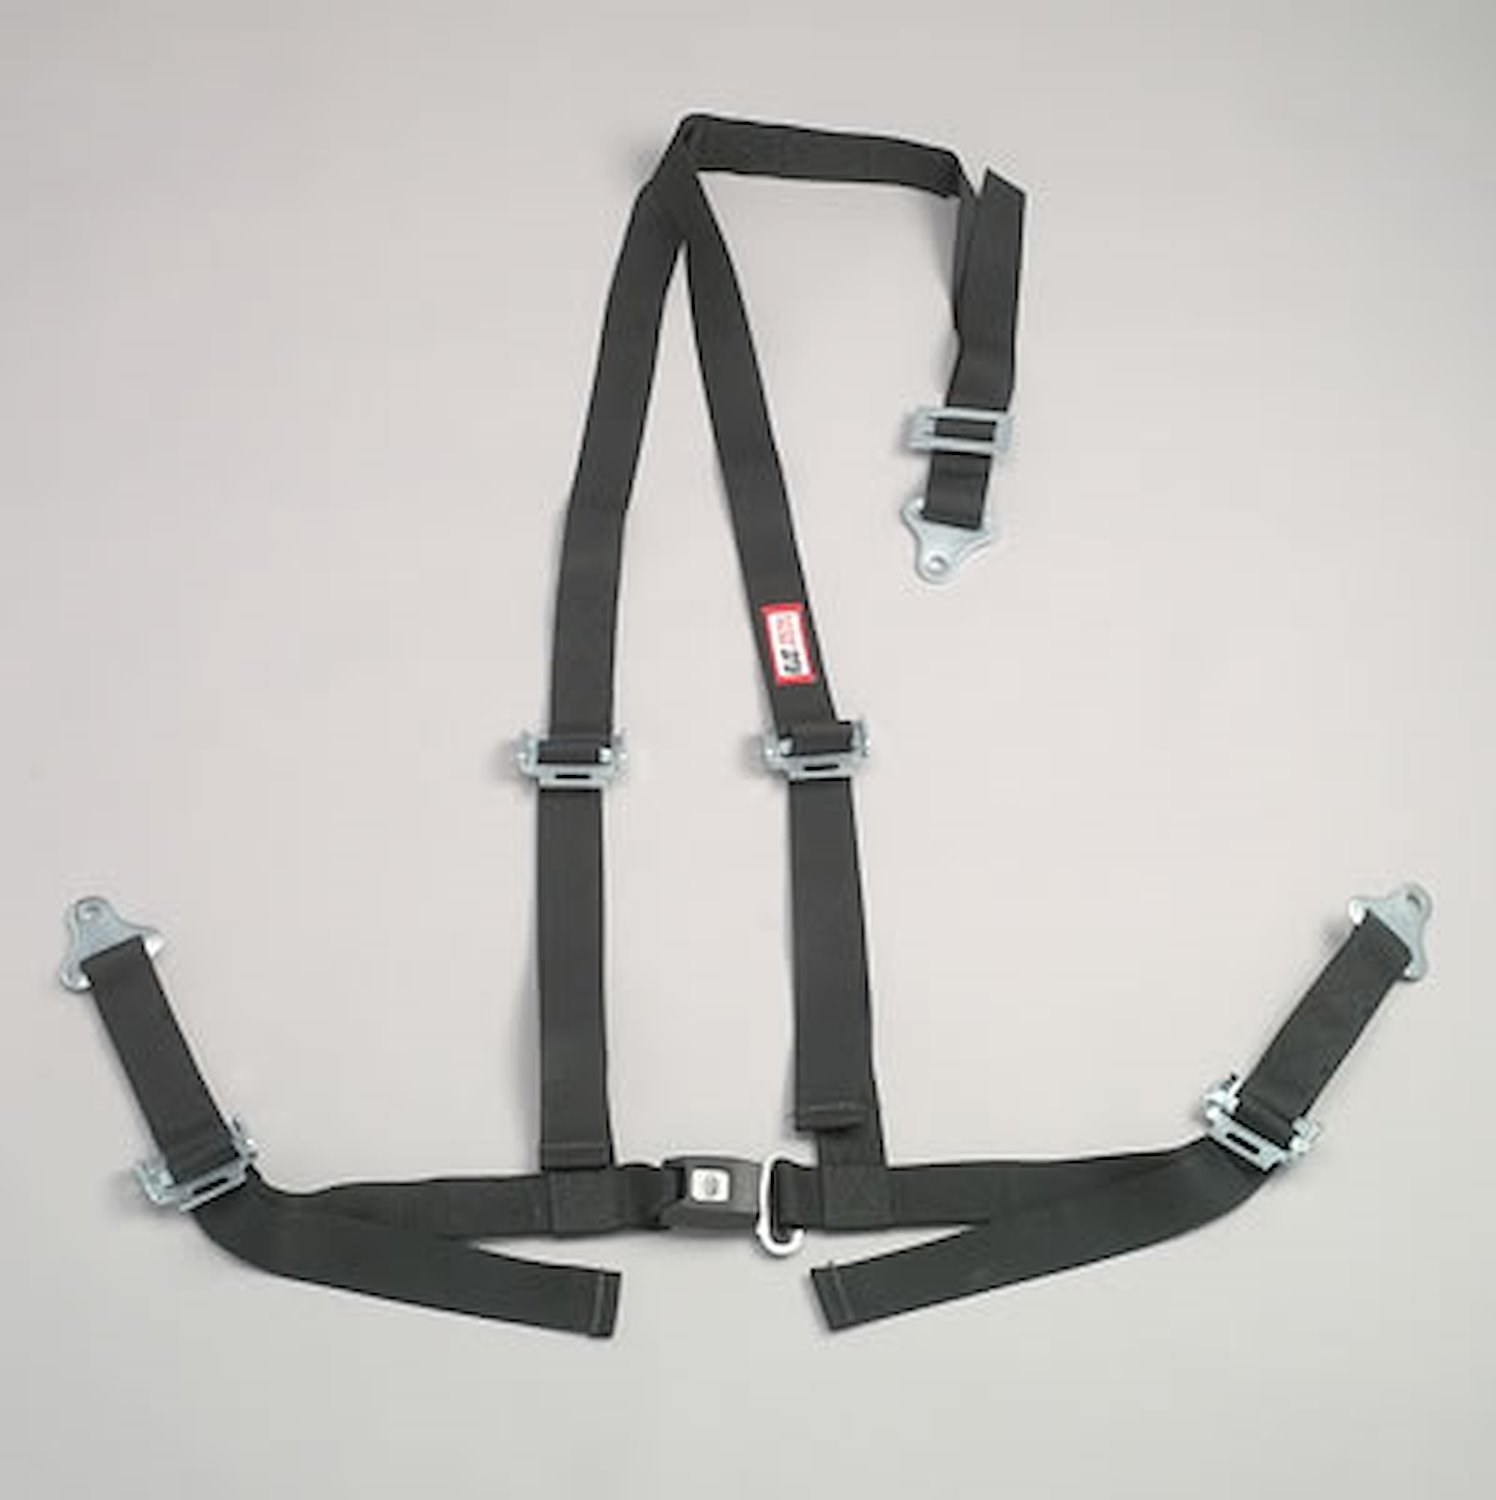 NON-SFI B&T HARNESS 2 PULL UP Lap Belt 2 S. H. Y FLOOR Mount ALL WRAP ENDS w/STERNUM STRAP ORANGE